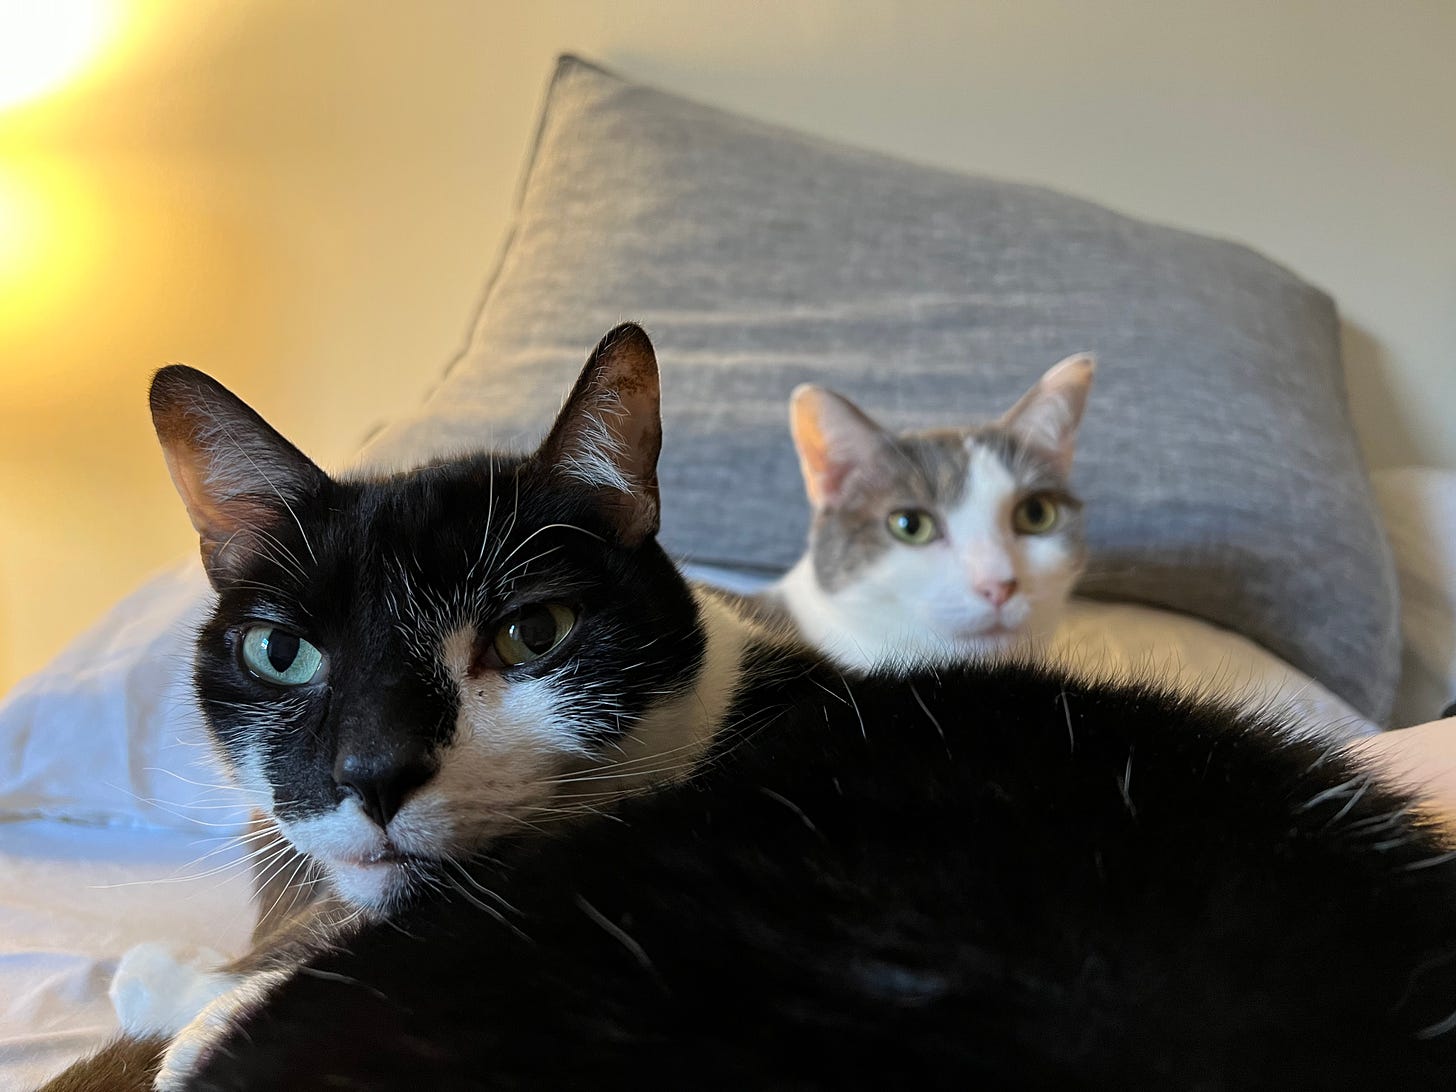 Two cats sit on a bed in front of pillows.